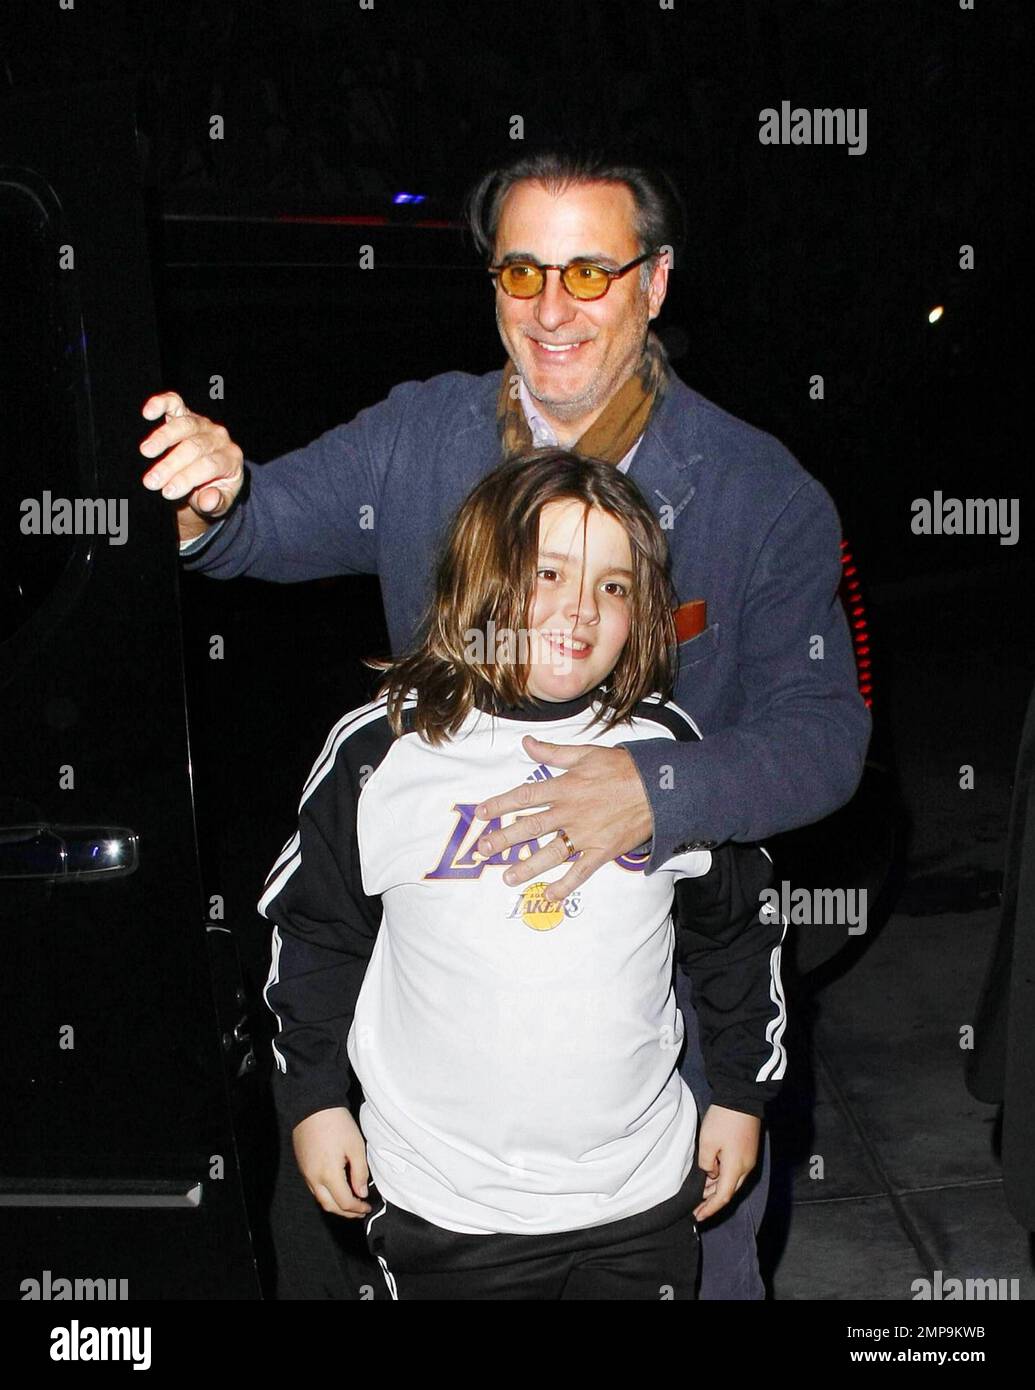 Andy Gardia and son Andres, 8, arrive in an SUV at the Staples Center to watch the LA Lakers vs. Houston Rockets basketball game.  Andy protectively held Andres, who wore a Lakers shirt, close as they smiled and made their way inside where they watched the Lakers beat the Rockets 114-106.   Los Angeles, CA. 02/01/11. Stock Photo